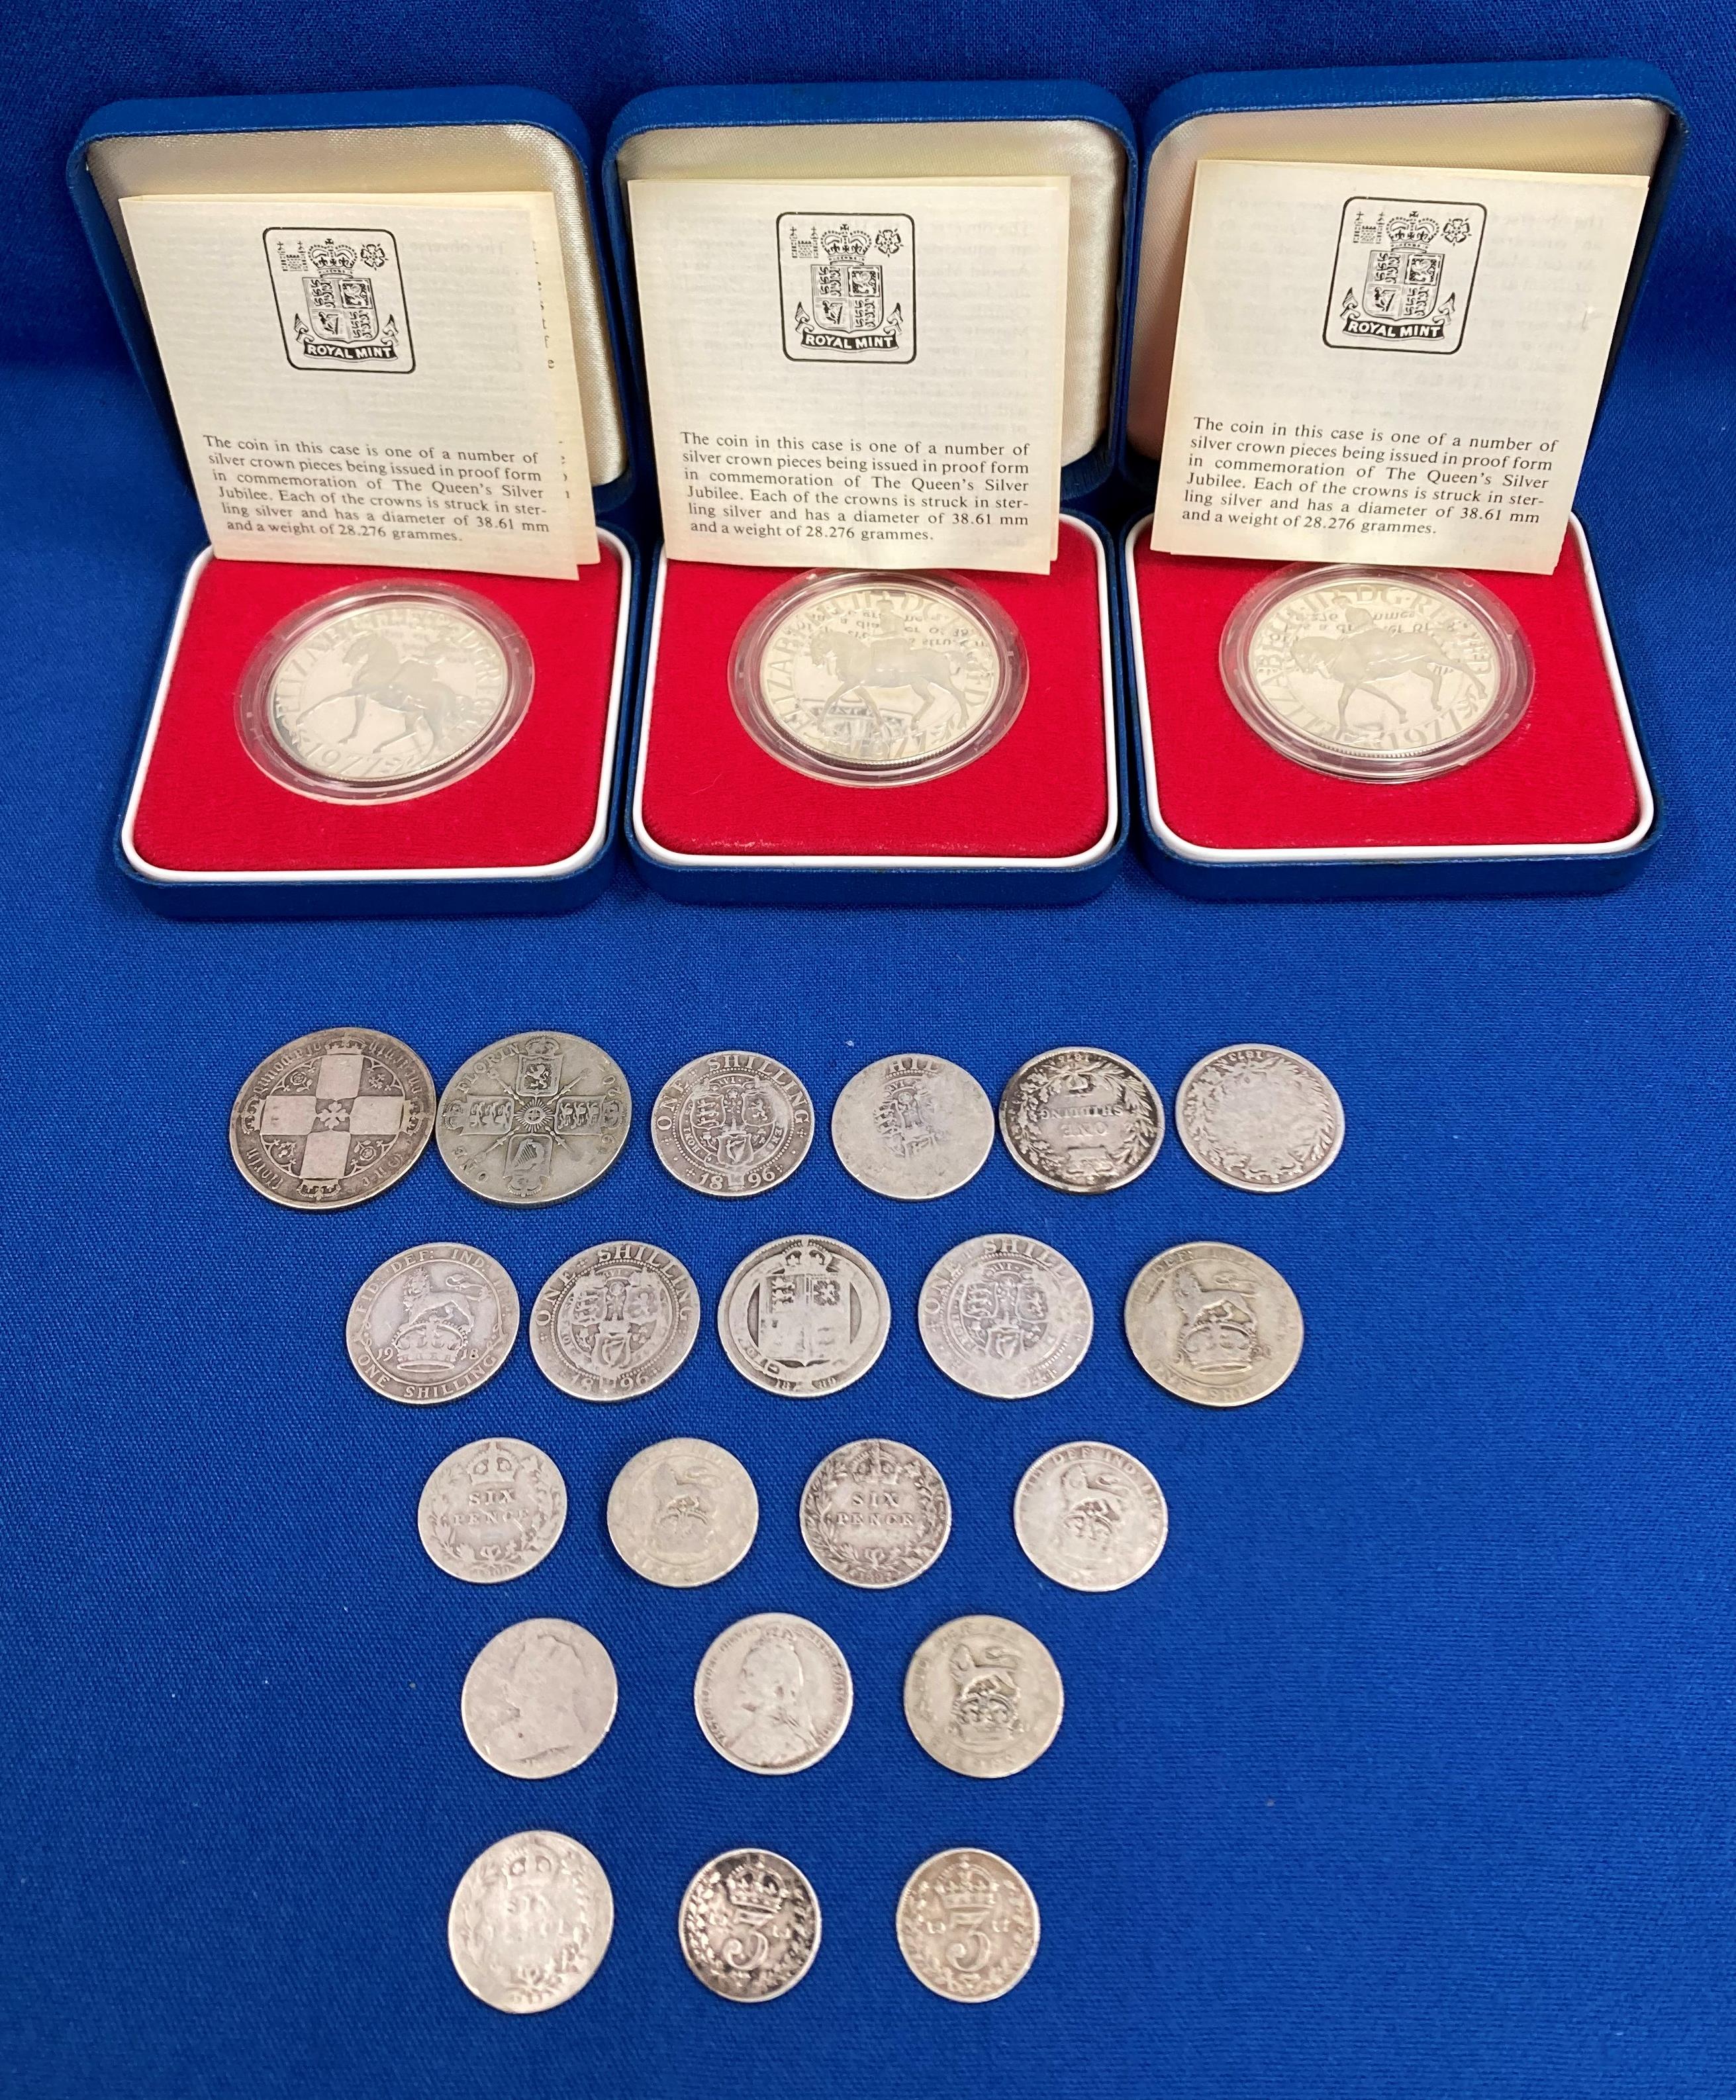 Assorted silver coins including three 1977 Royal Mint Crowns (in cases) and assorted silver